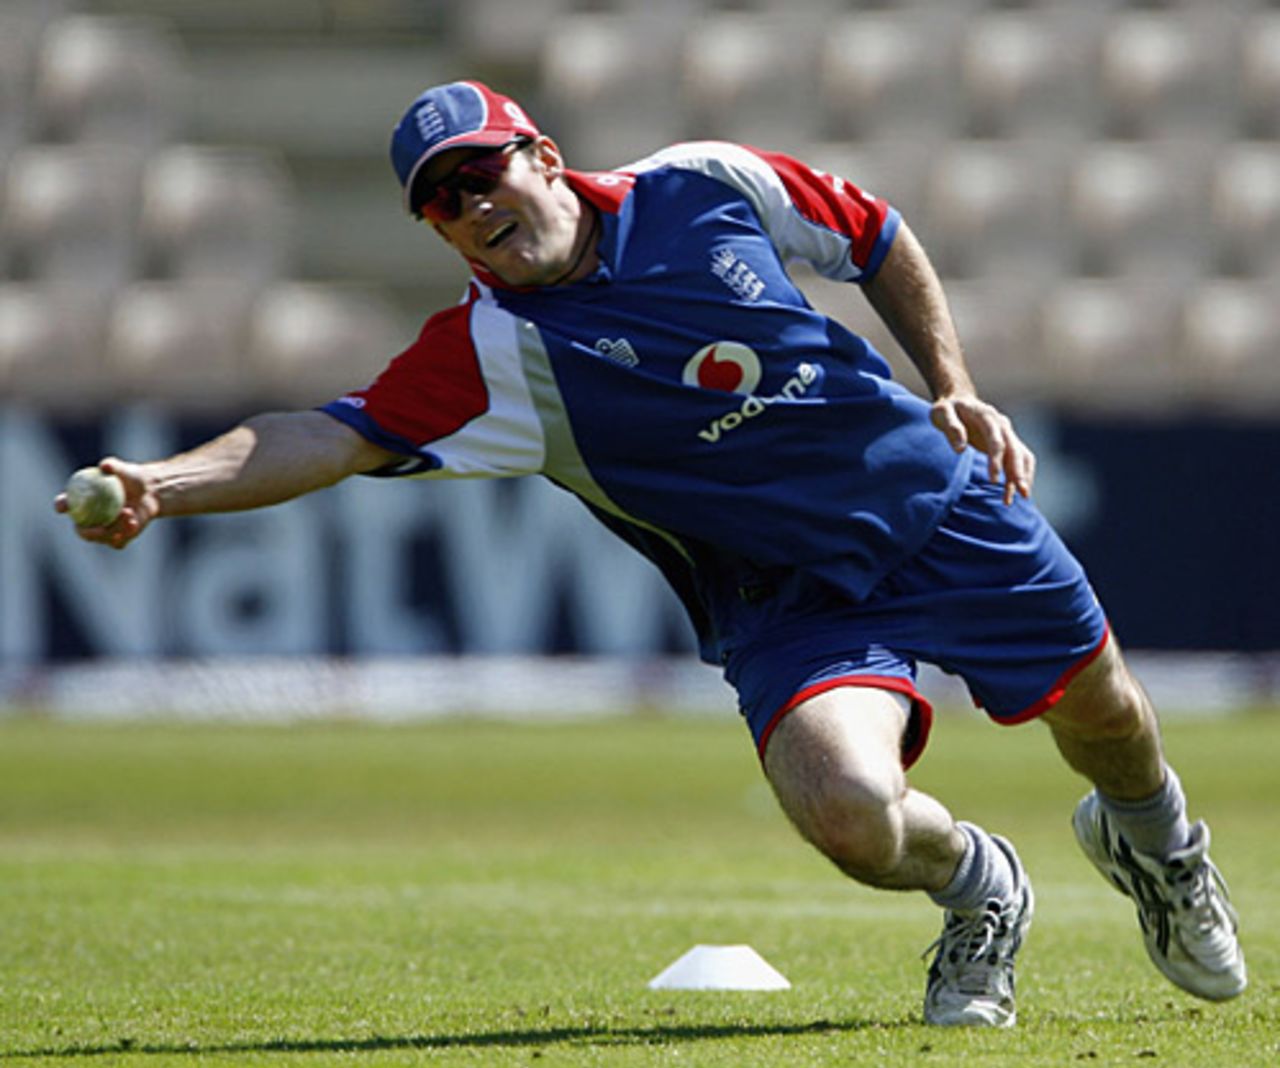 Andrew Strauss clings on to a catch during a fielding session, England v Sri Lanka, Twenty20, Southampton, June 15, 2006